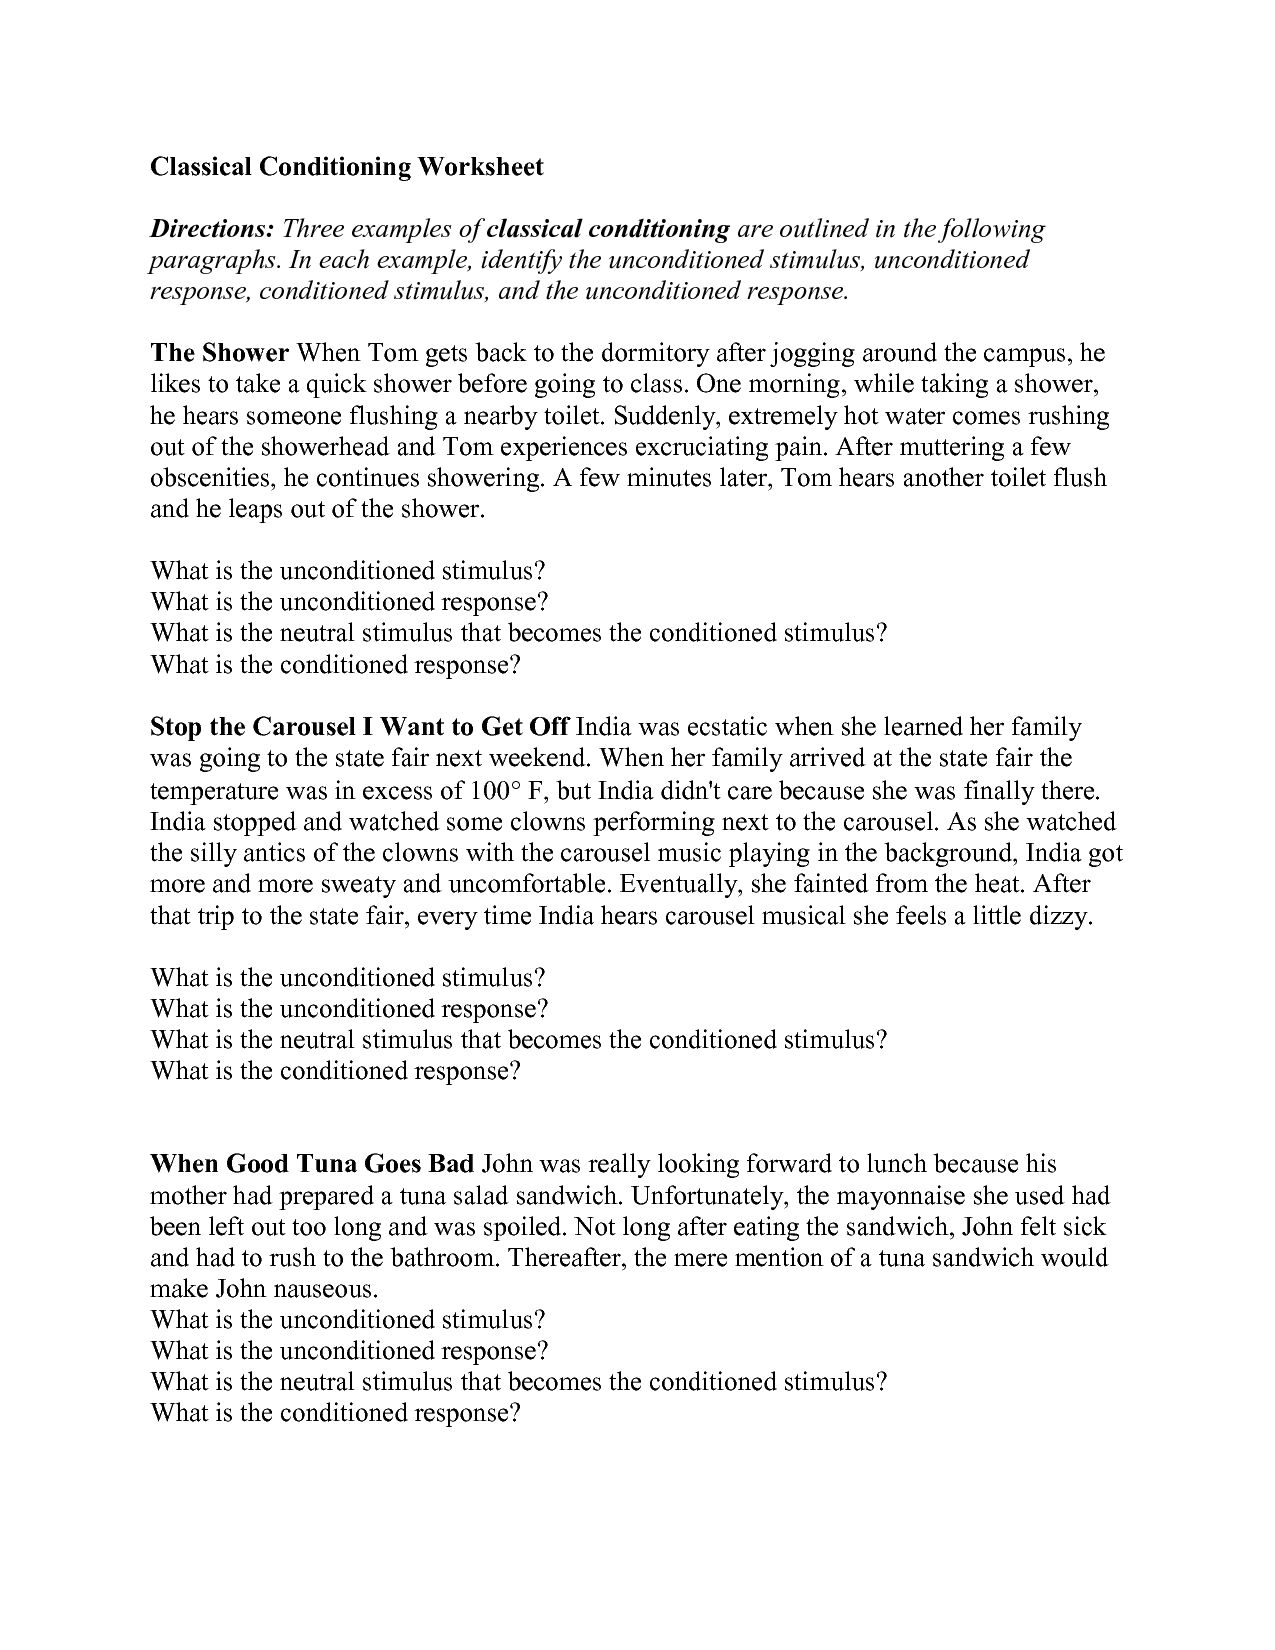 Examples Classical Conditioning Worksheet